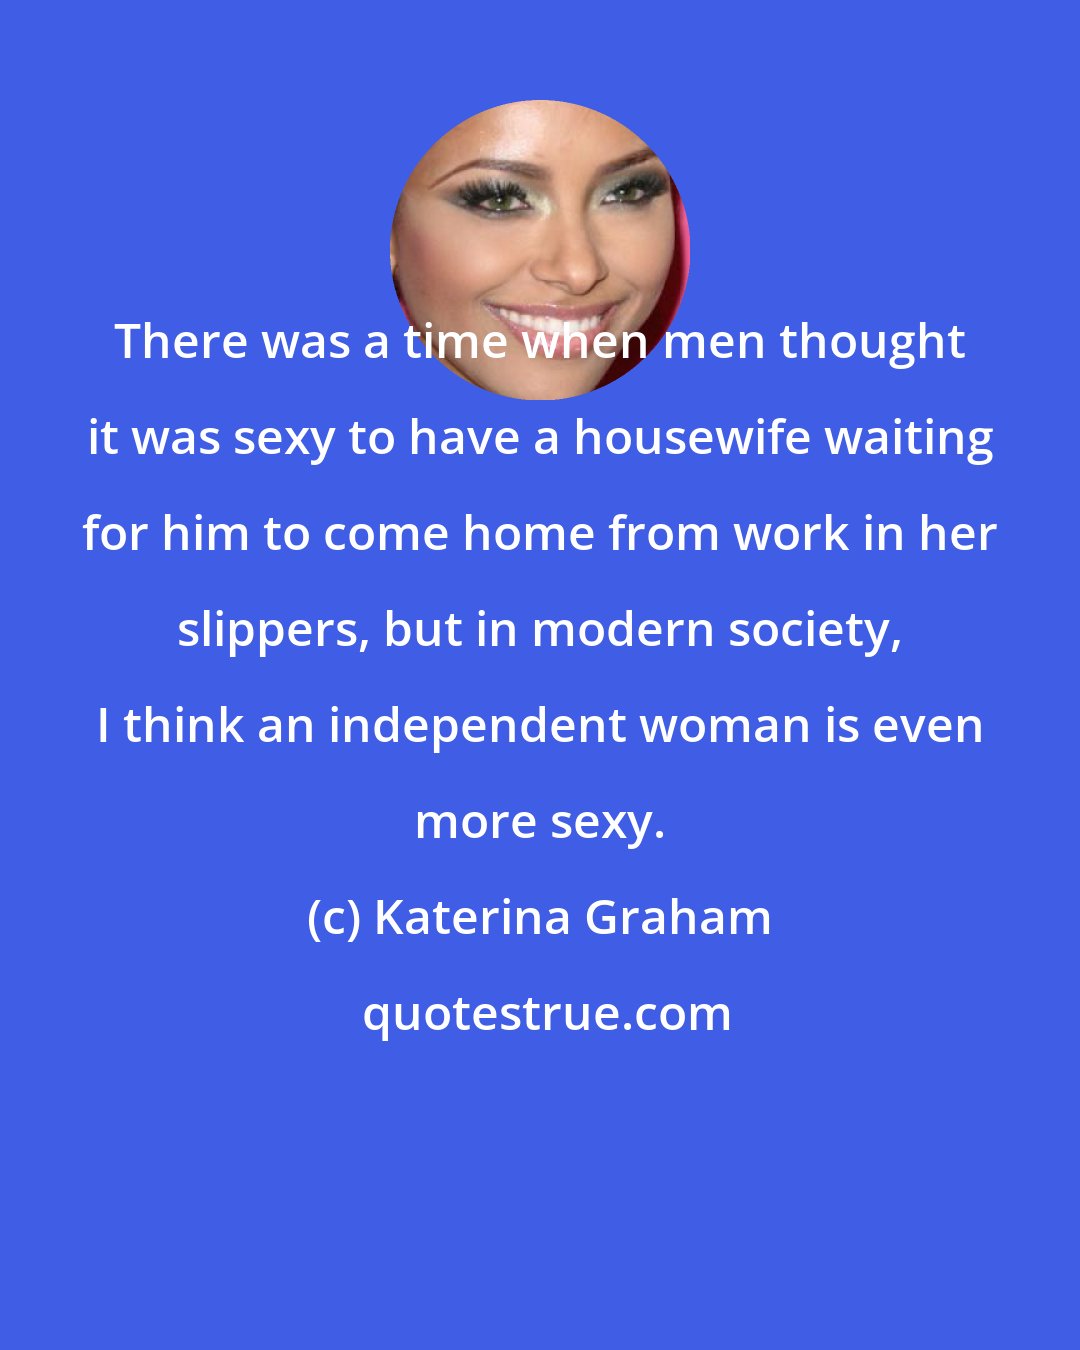 Katerina Graham: There was a time when men thought it was sexy to have a housewife waiting for him to come home from work in her slippers, but in modern society, I think an independent woman is even more sexy.